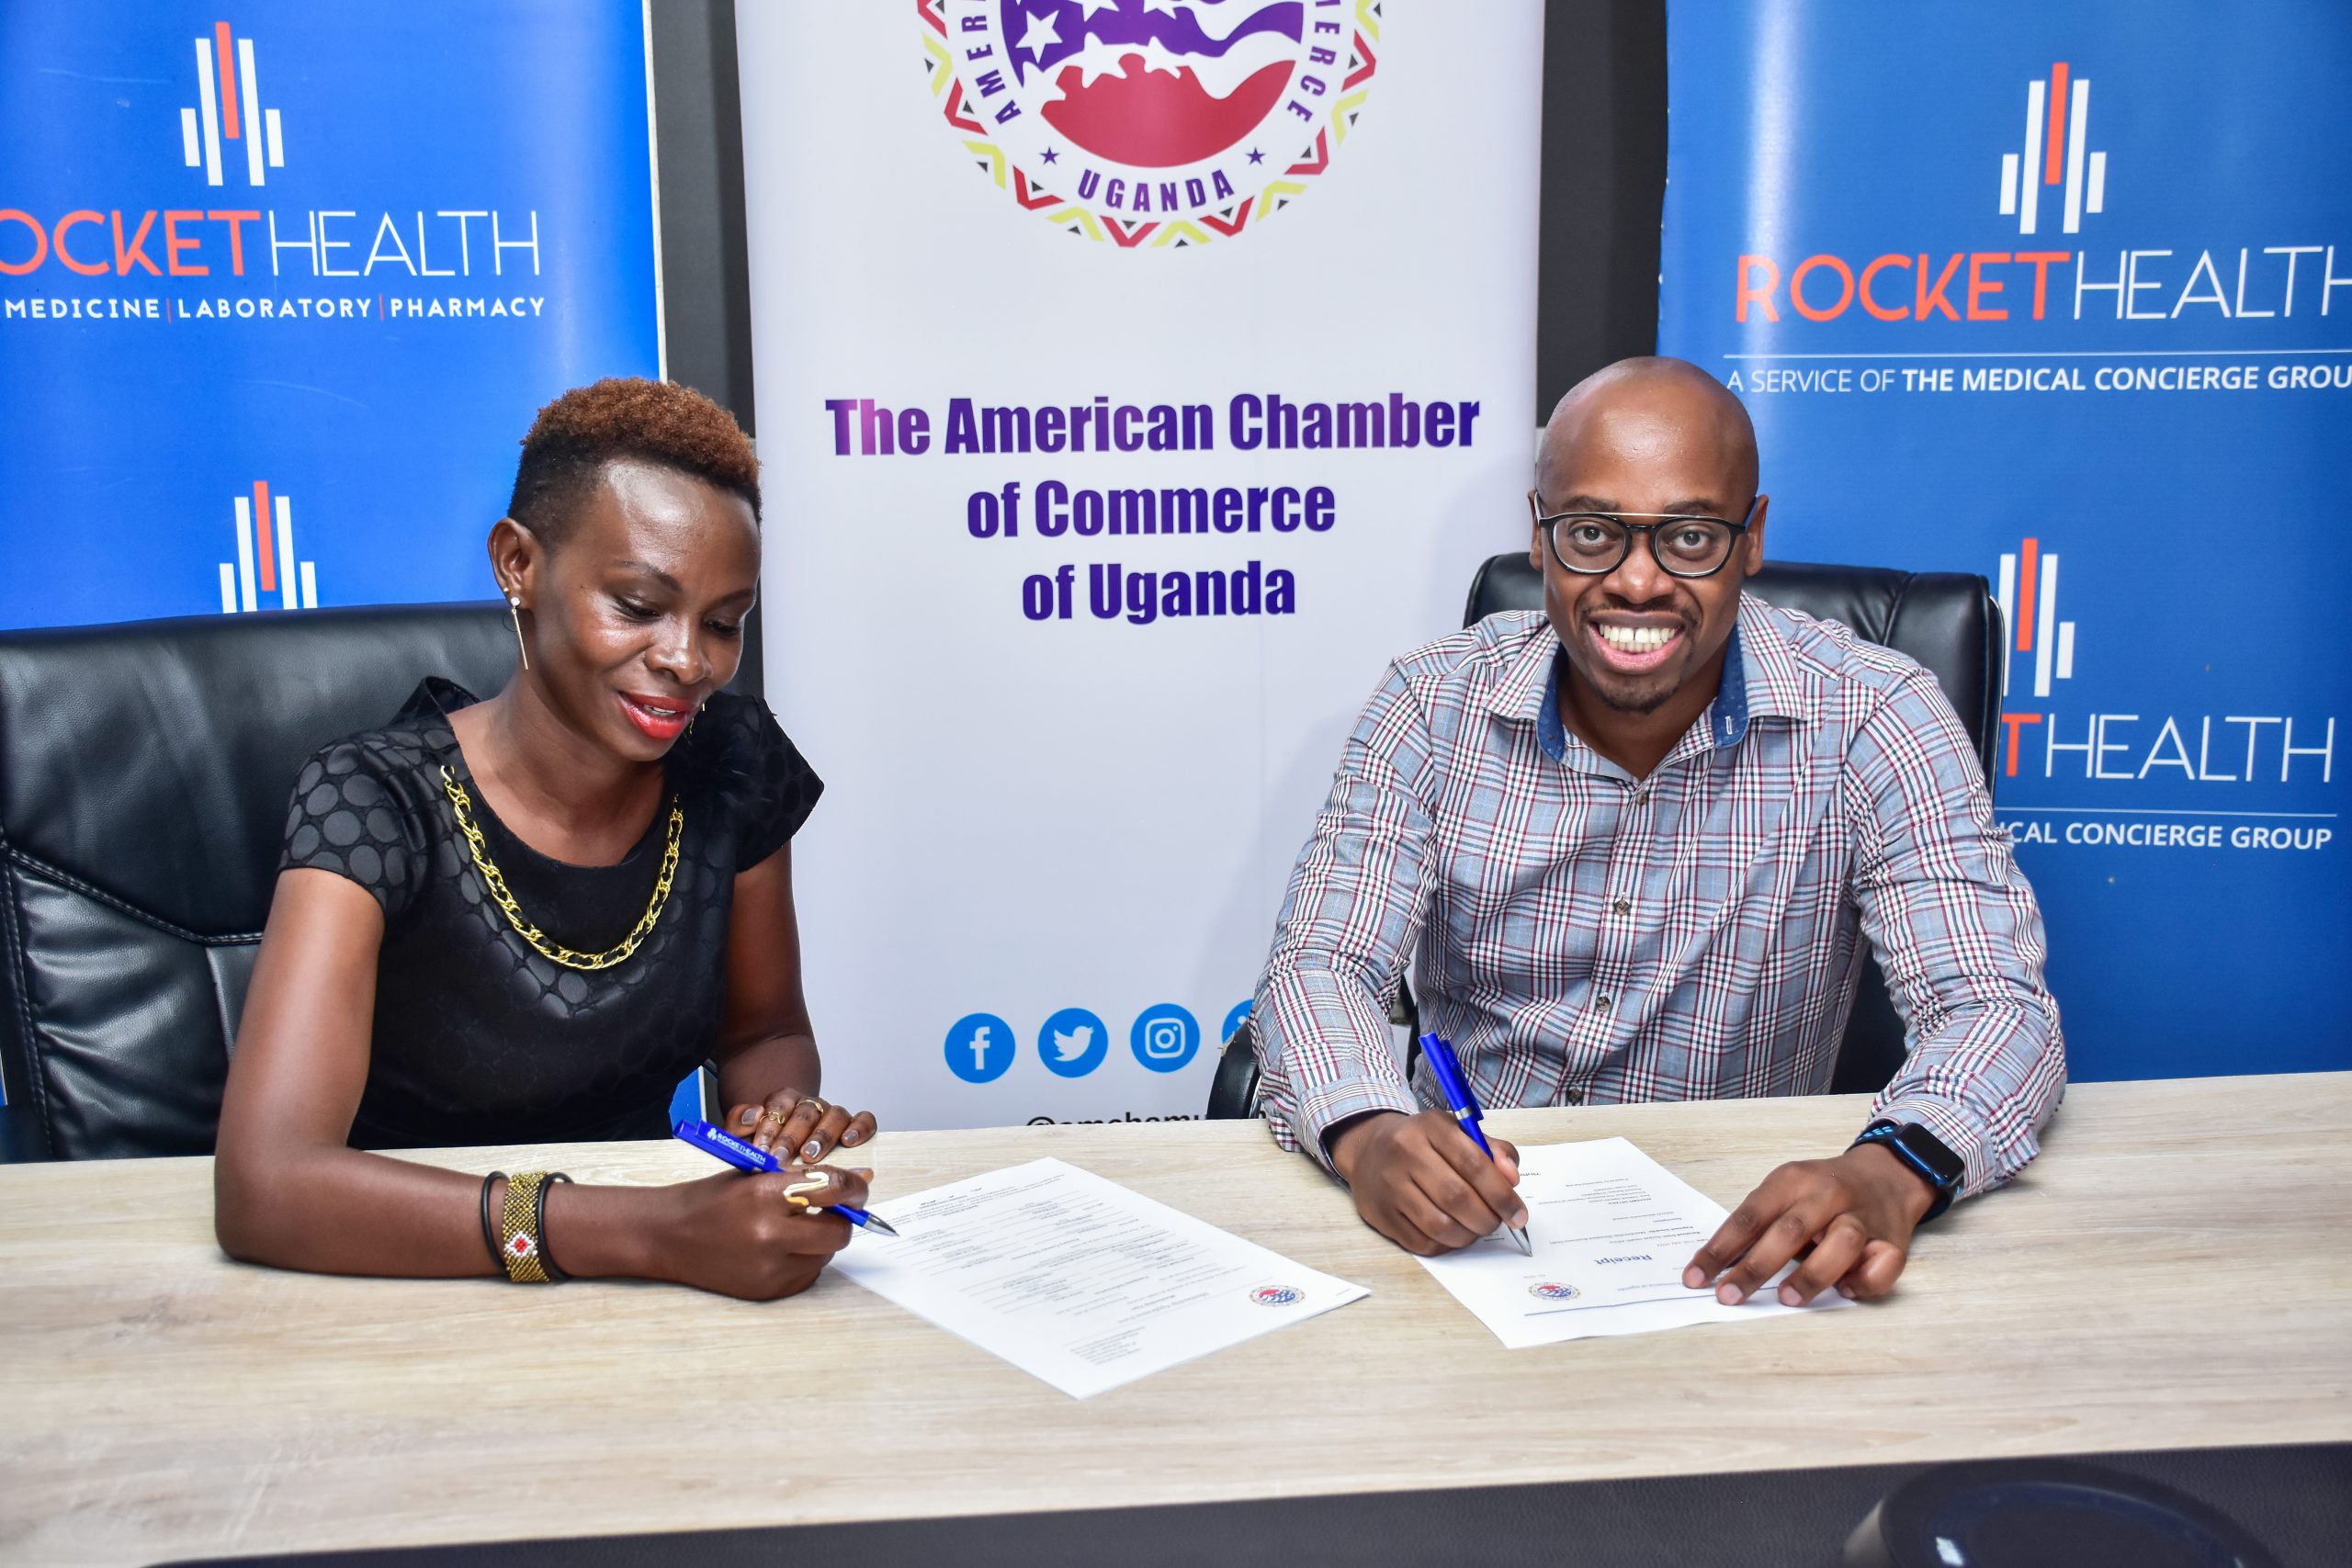 Rocket Health Joins American Chamber Of Commerce